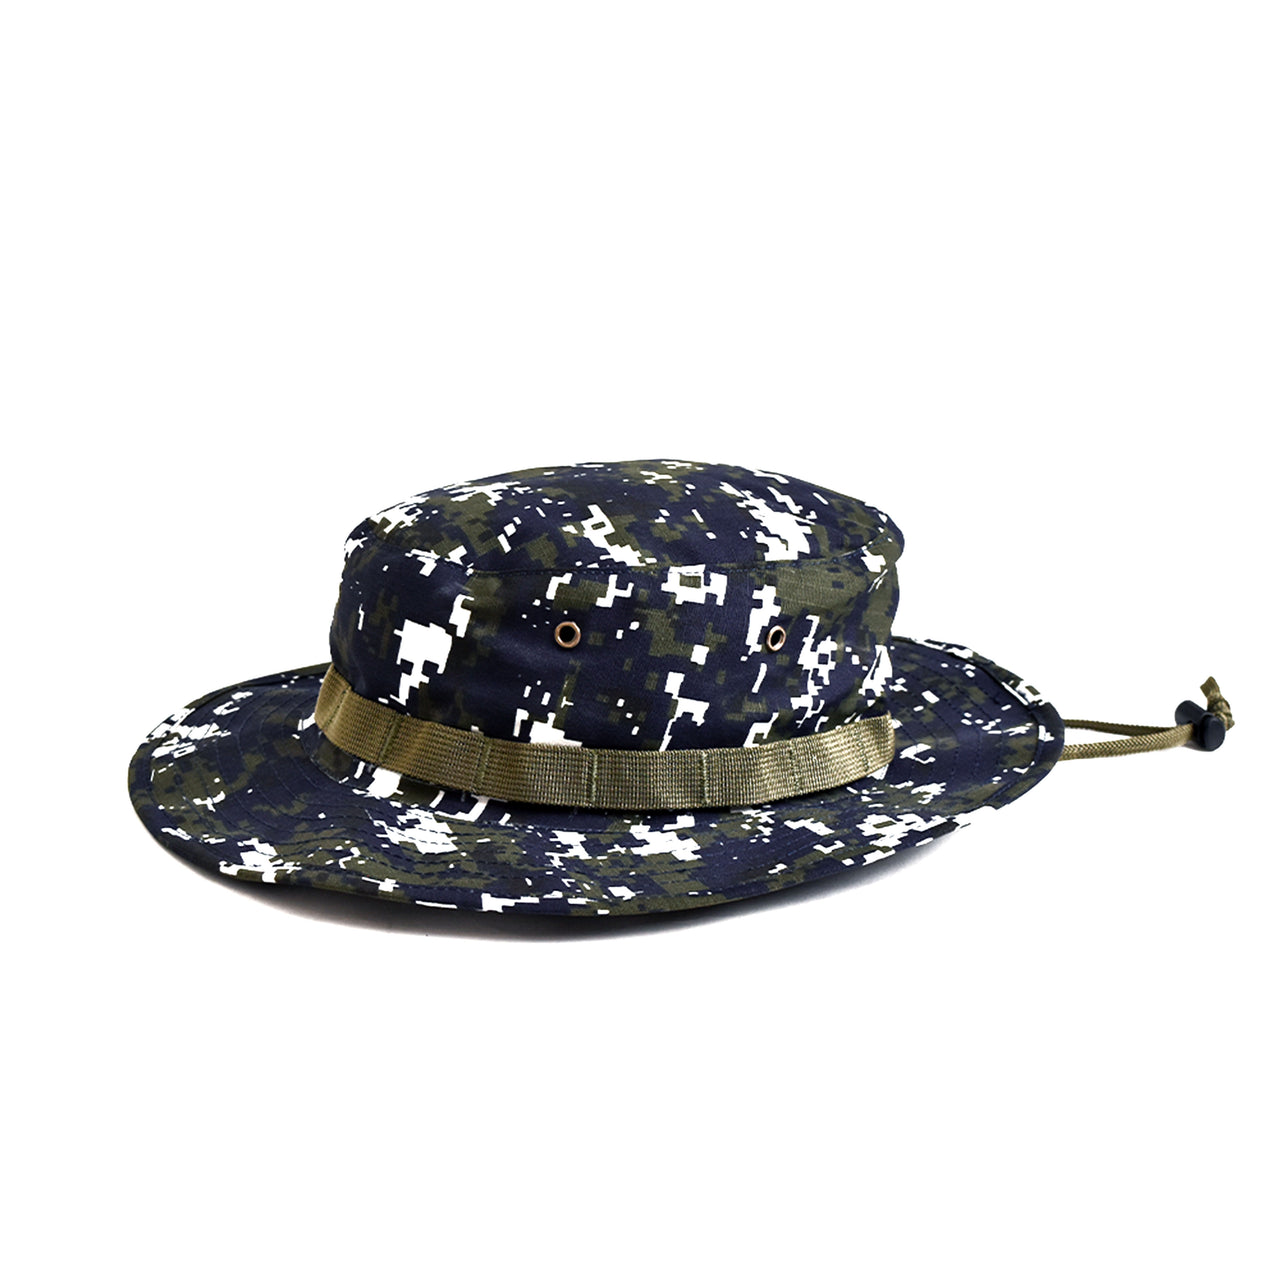 Military Boonie Hat - Indian Navy Digital Camouflage